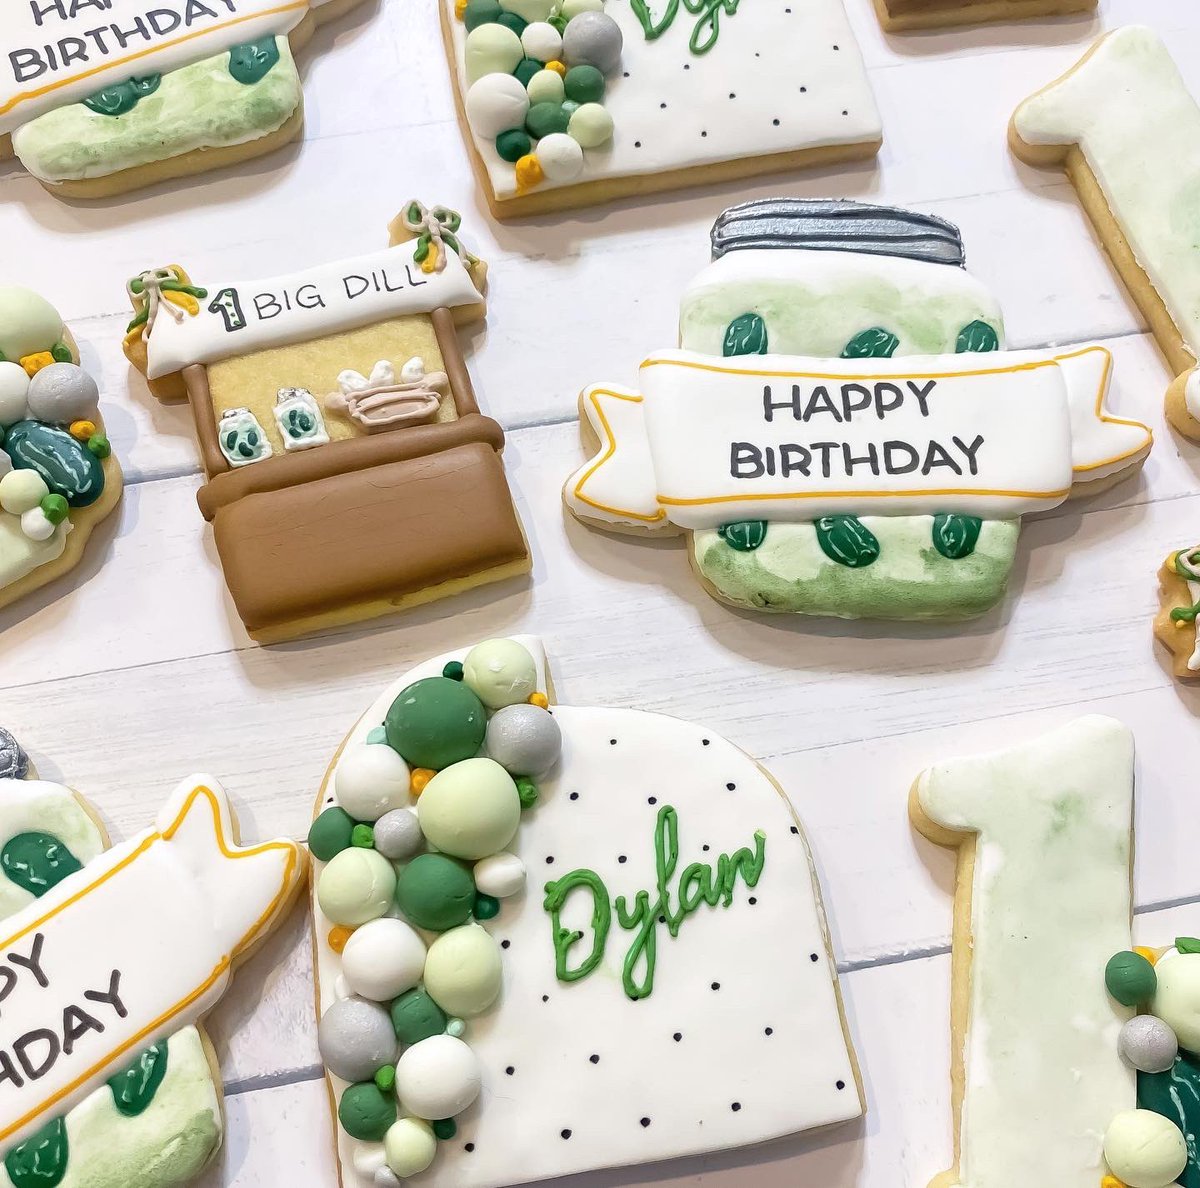 🥒🎉 Celebrating a whole year of adorable milestones with a dill-ightful twist! These pickled cookies custom made for a little one’s 1st birthday bash!#DilliciousBirthday #PicklesAndDill 🥒🎈🍪
. 🍪Hand painted cookies decorated with @satinice fondant.
#customcookies #cookiegram…